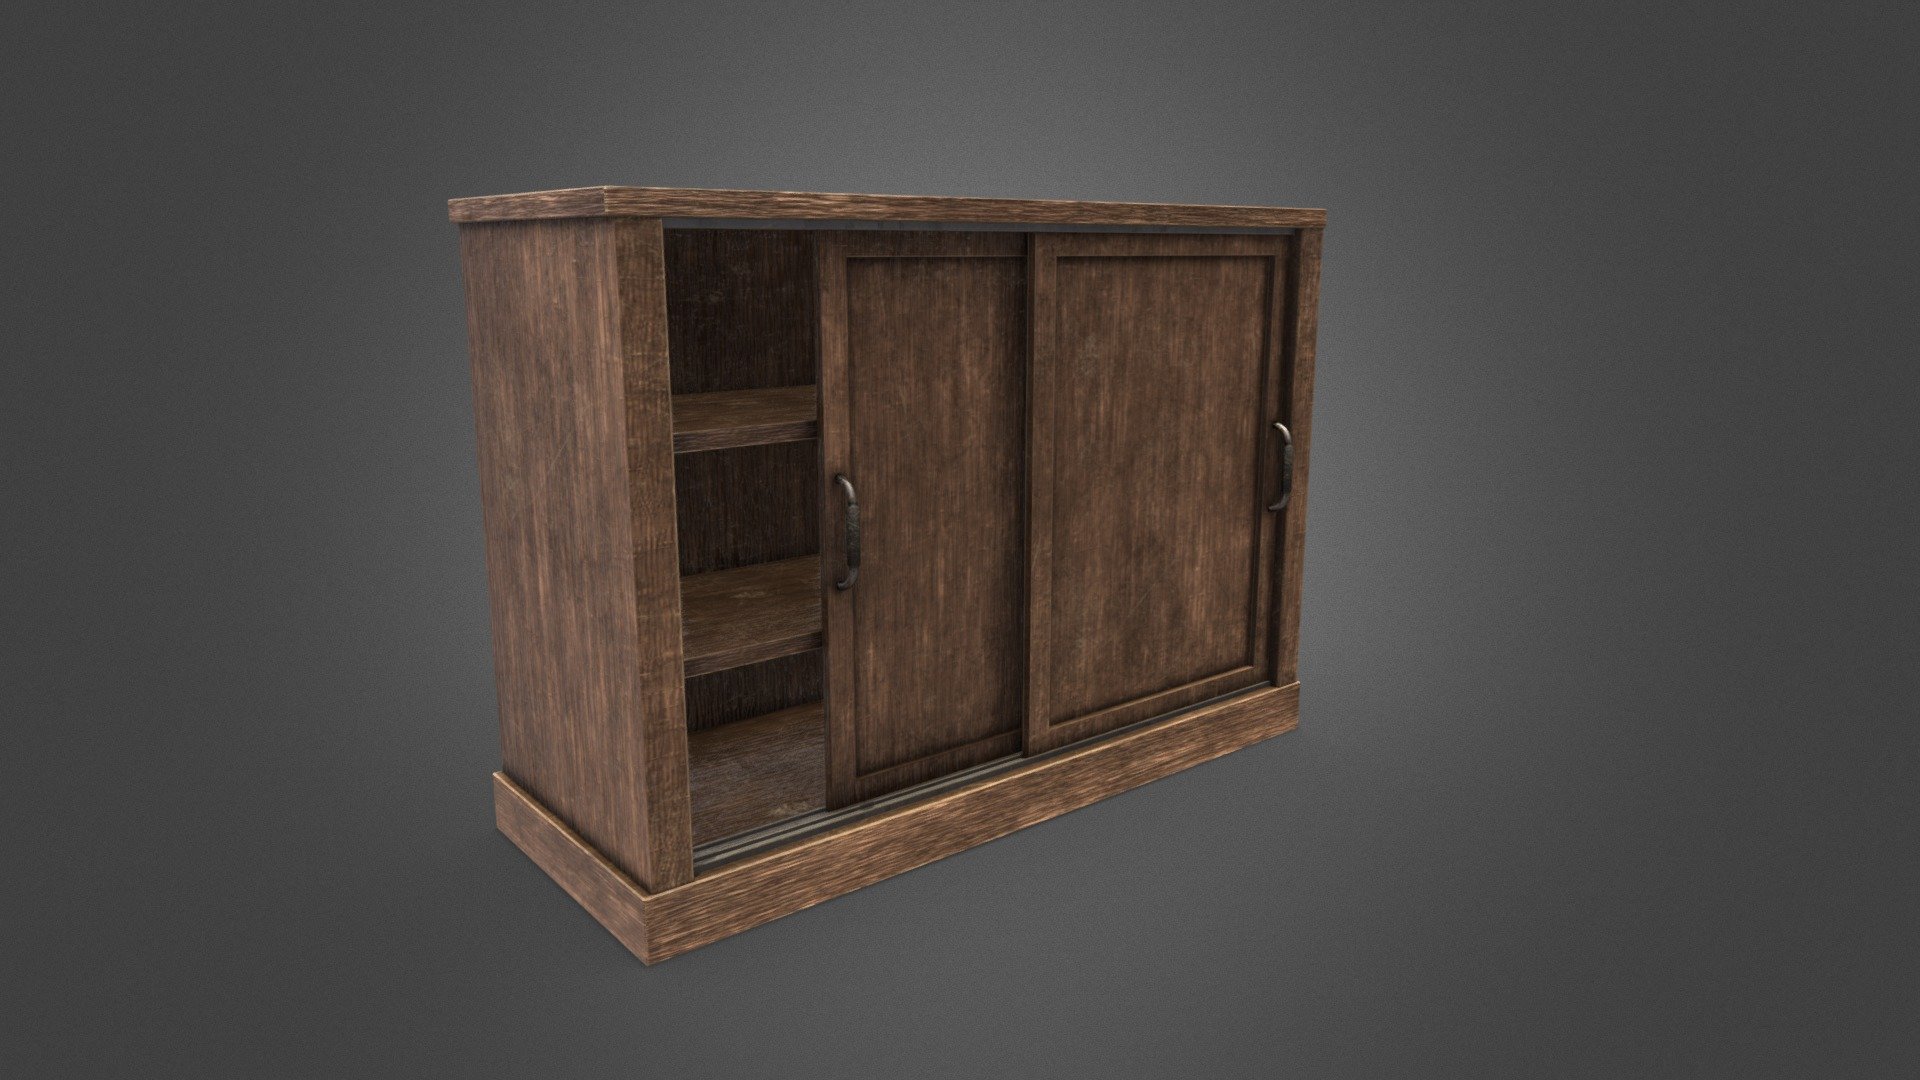 This cupboard was made for a scene in Naruto’s room.

Free to use

Made in Blender, baked and textured in Substance Painter. 4K textures. 6 UV sets

If you liked the model, I will be glad to have your like on my ArtStation profile - Cupboard - Download Free 3D model by Viggo (@Viggoa) 3d model